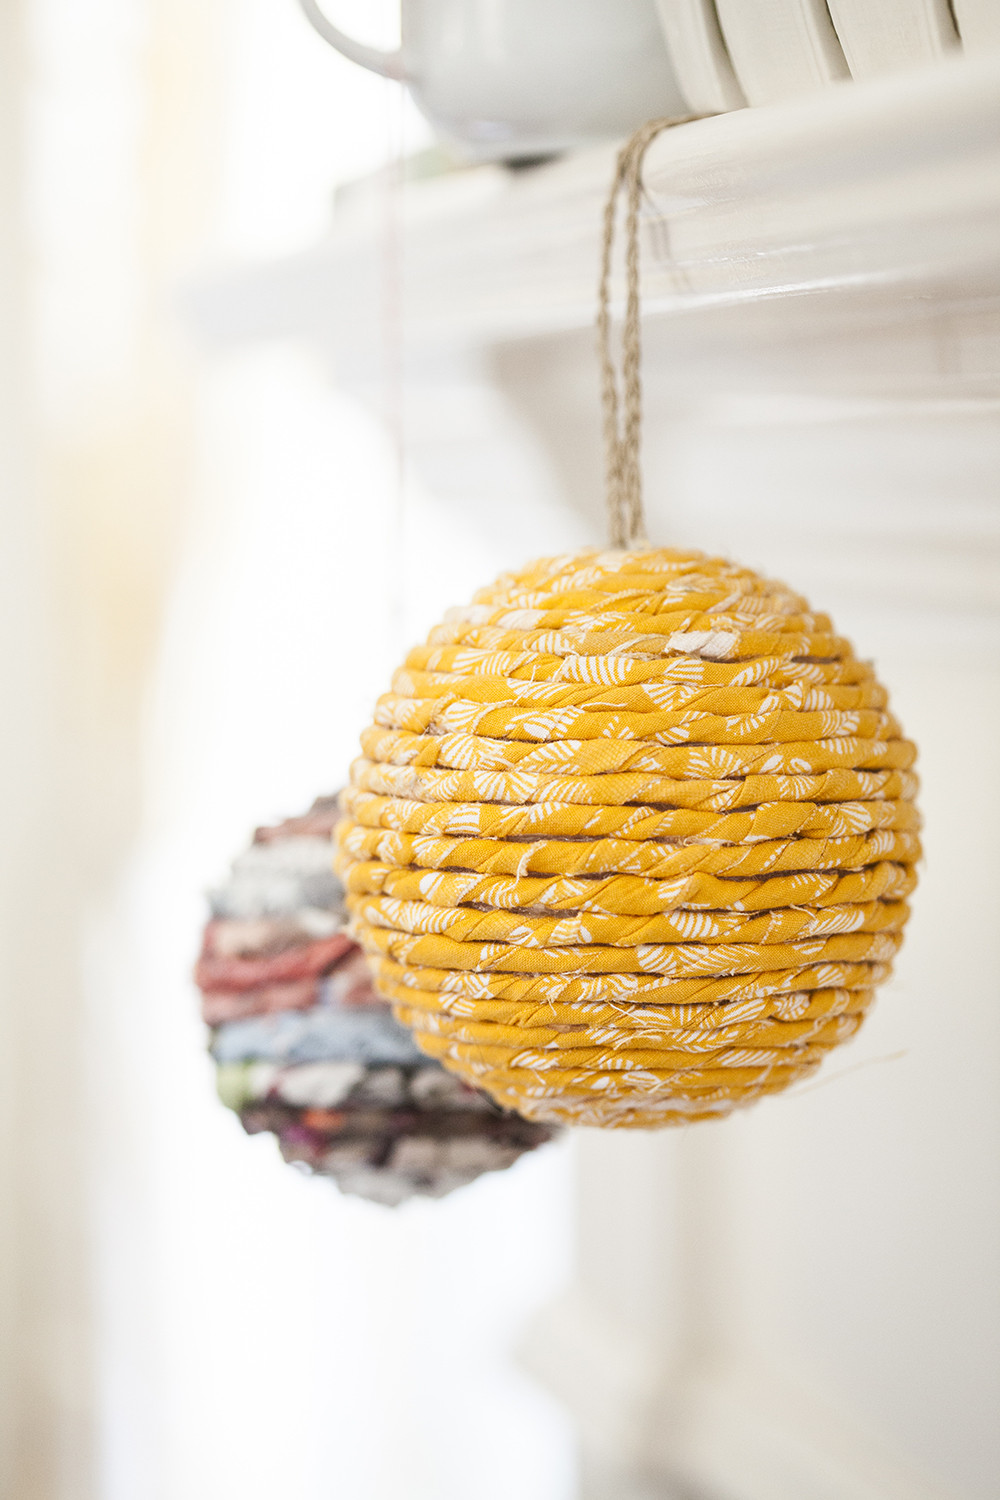 DIY Christmas Ball Ornaments
 Easy DIY Wrapped Ball Ornament offbeat inspired